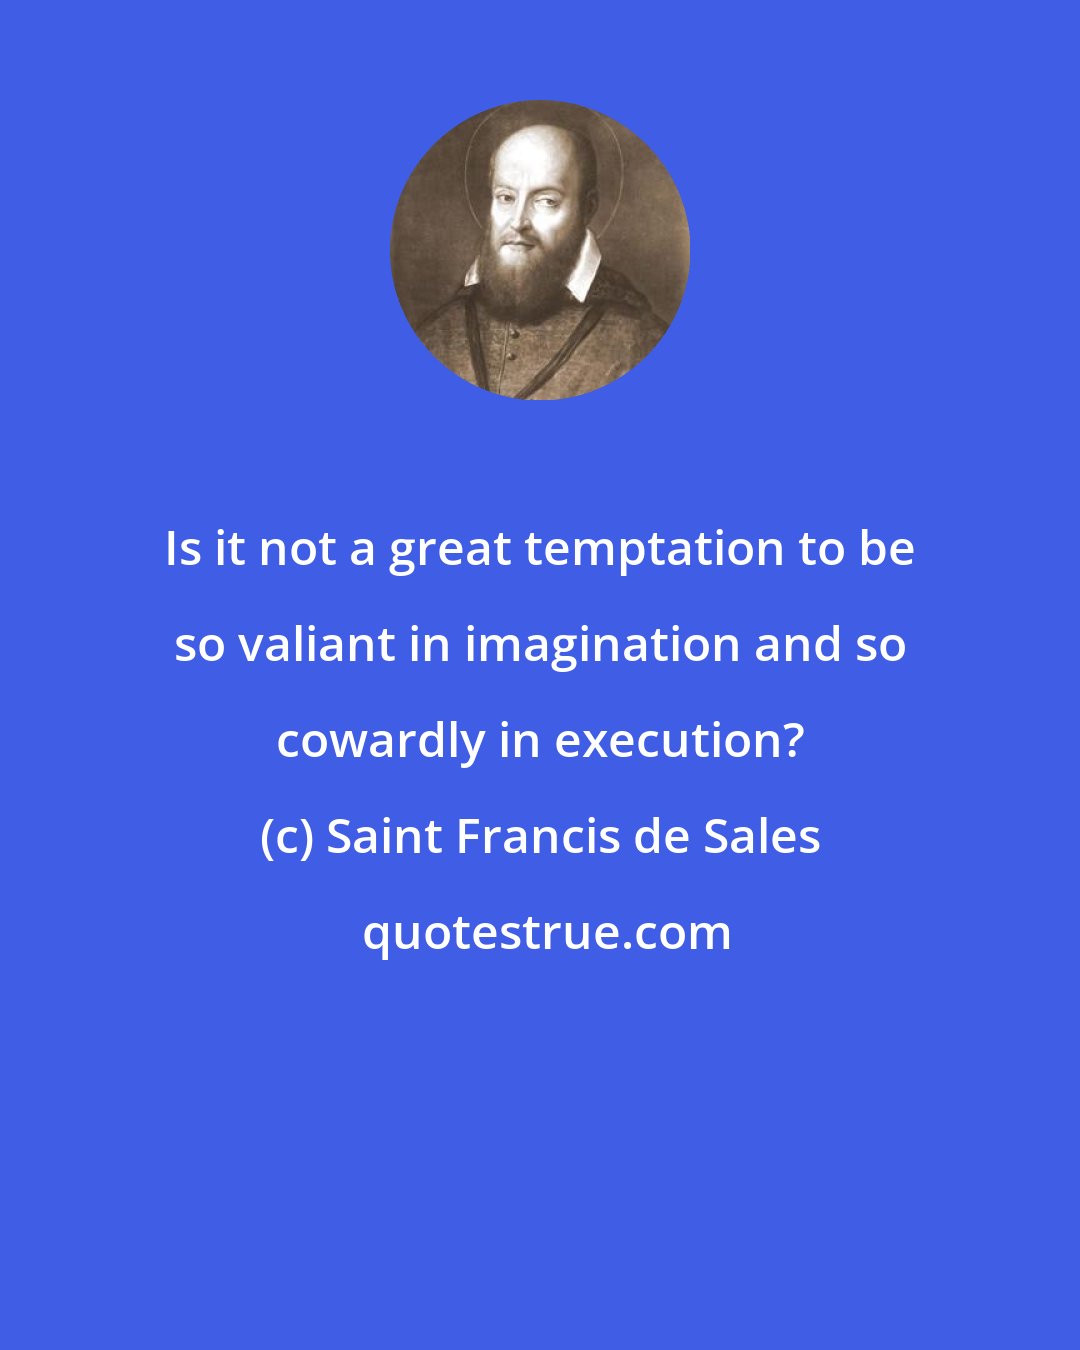 Saint Francis de Sales: Is it not a great temptation to be so valiant in imagination and so cowardly in execution?